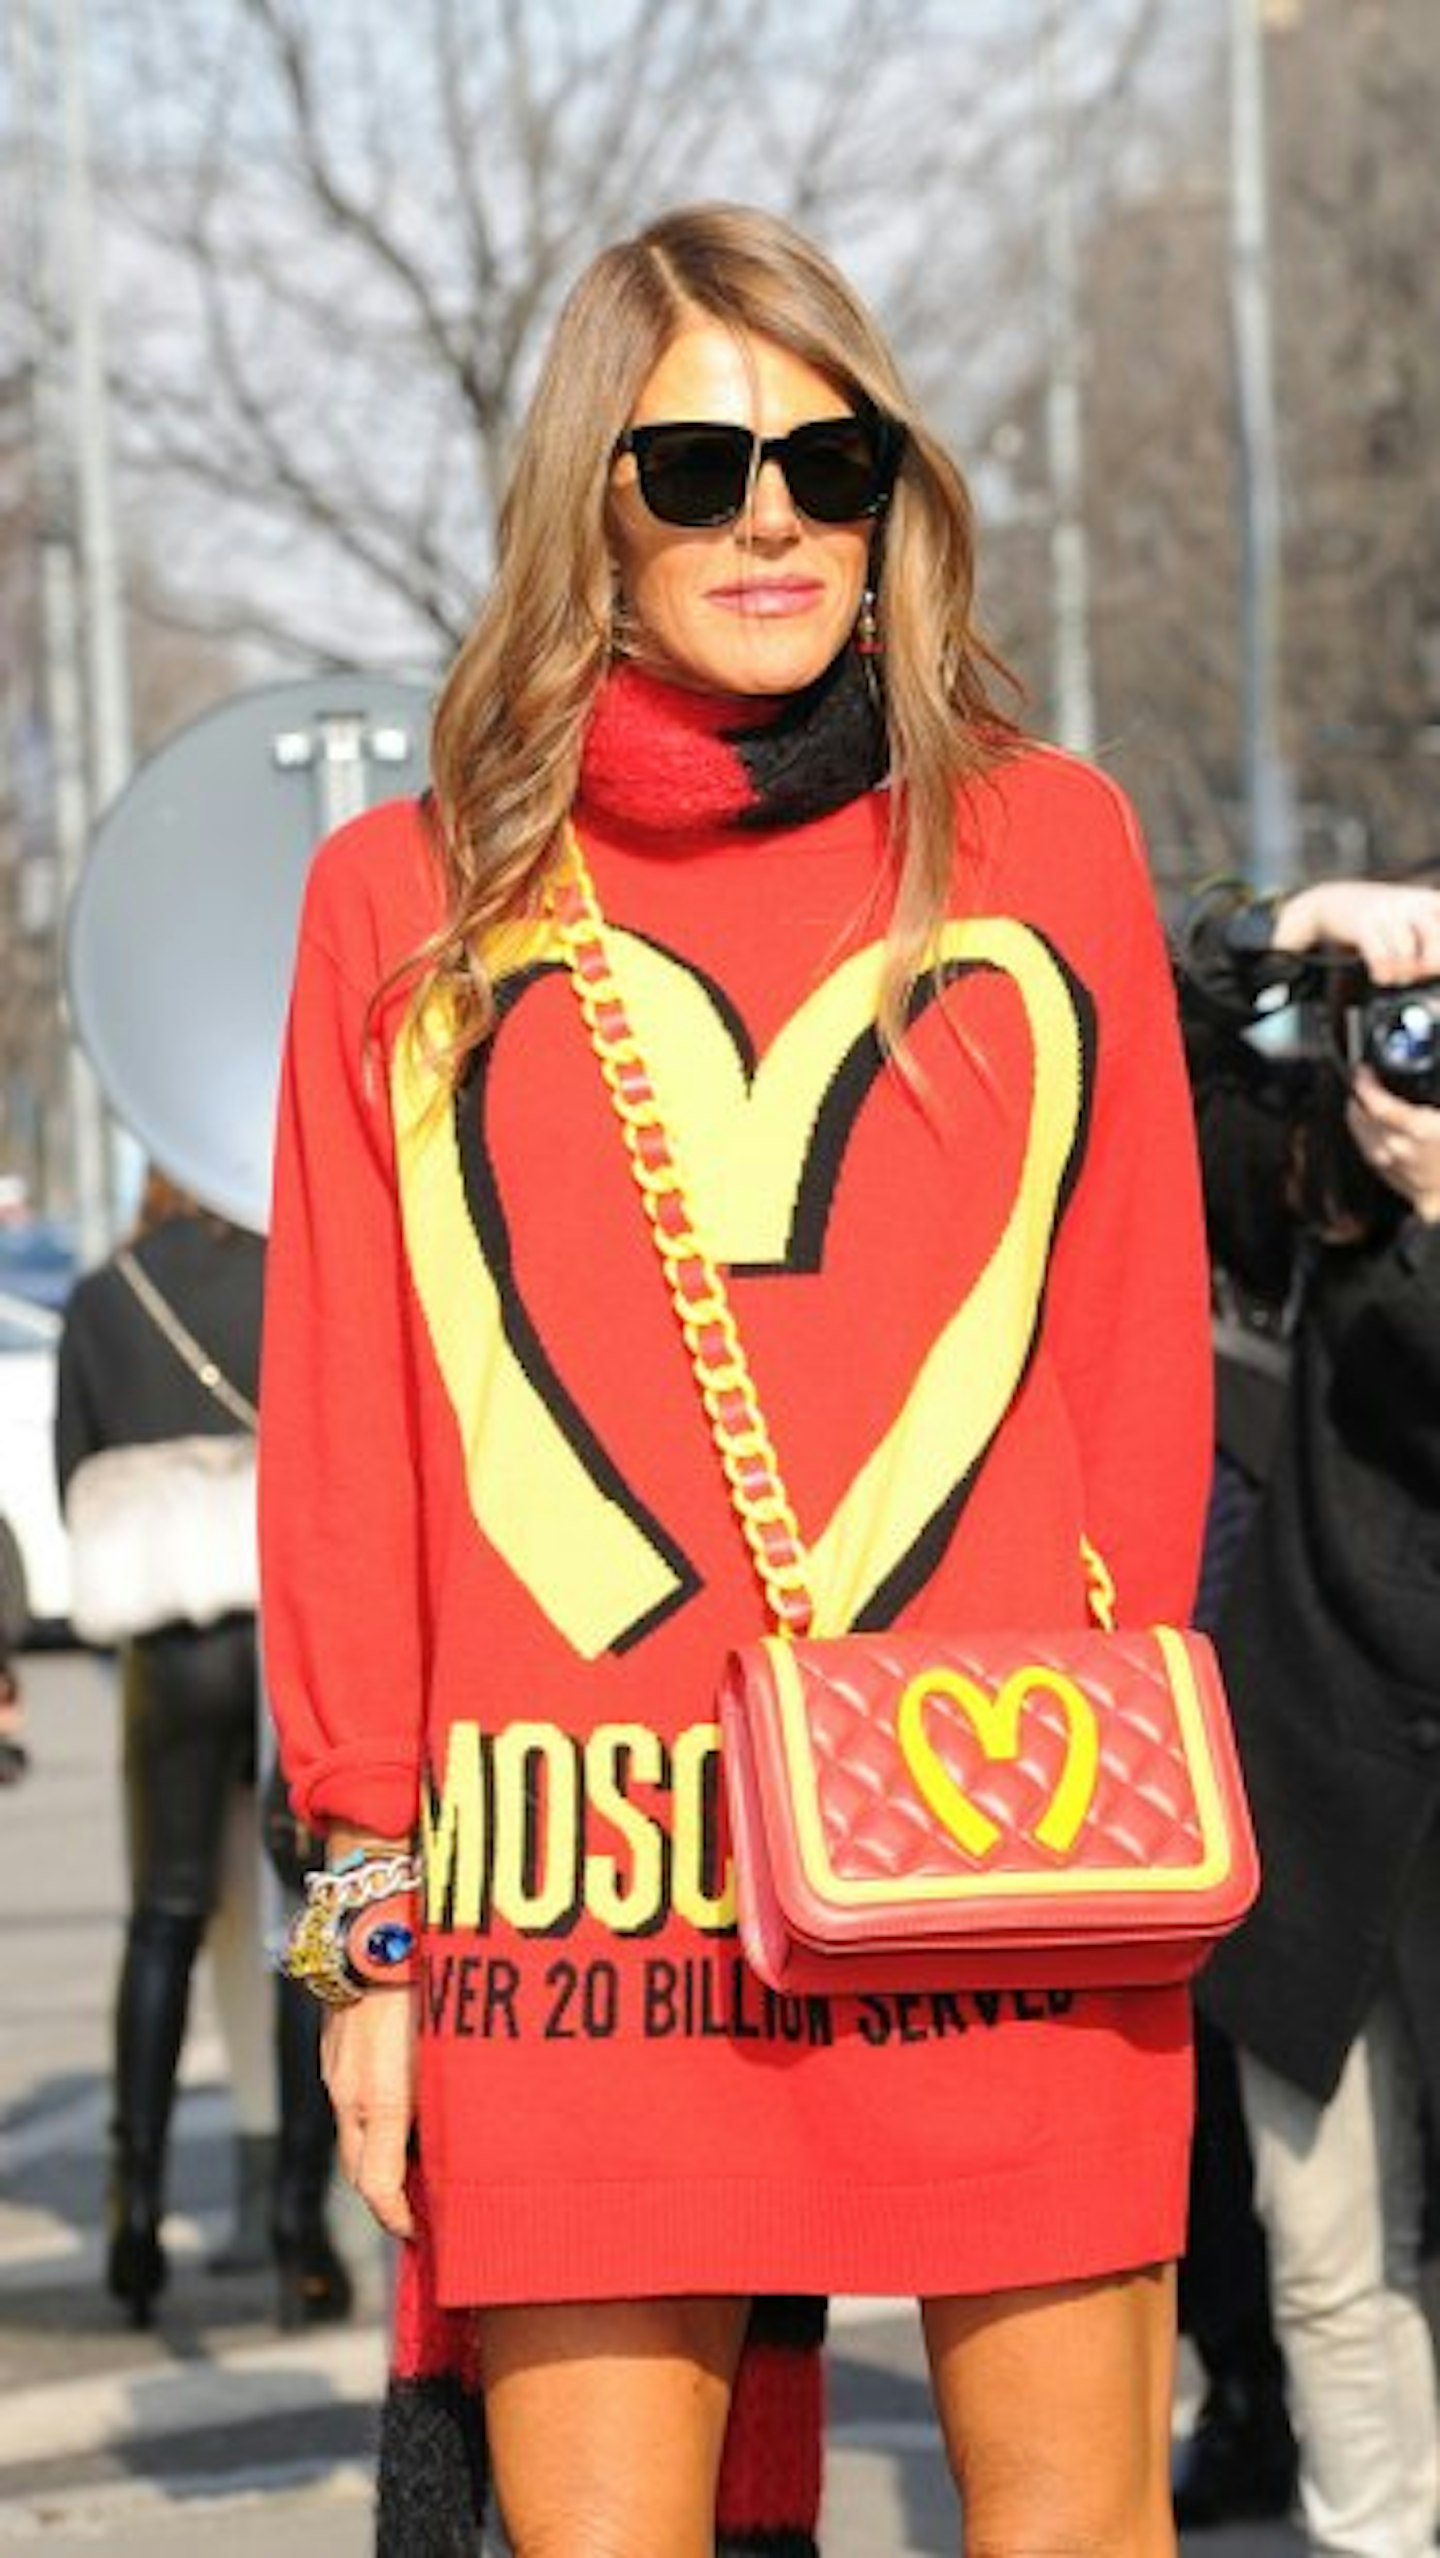 Burger With a Side of Fashion - Moschino spoofs McDonald's